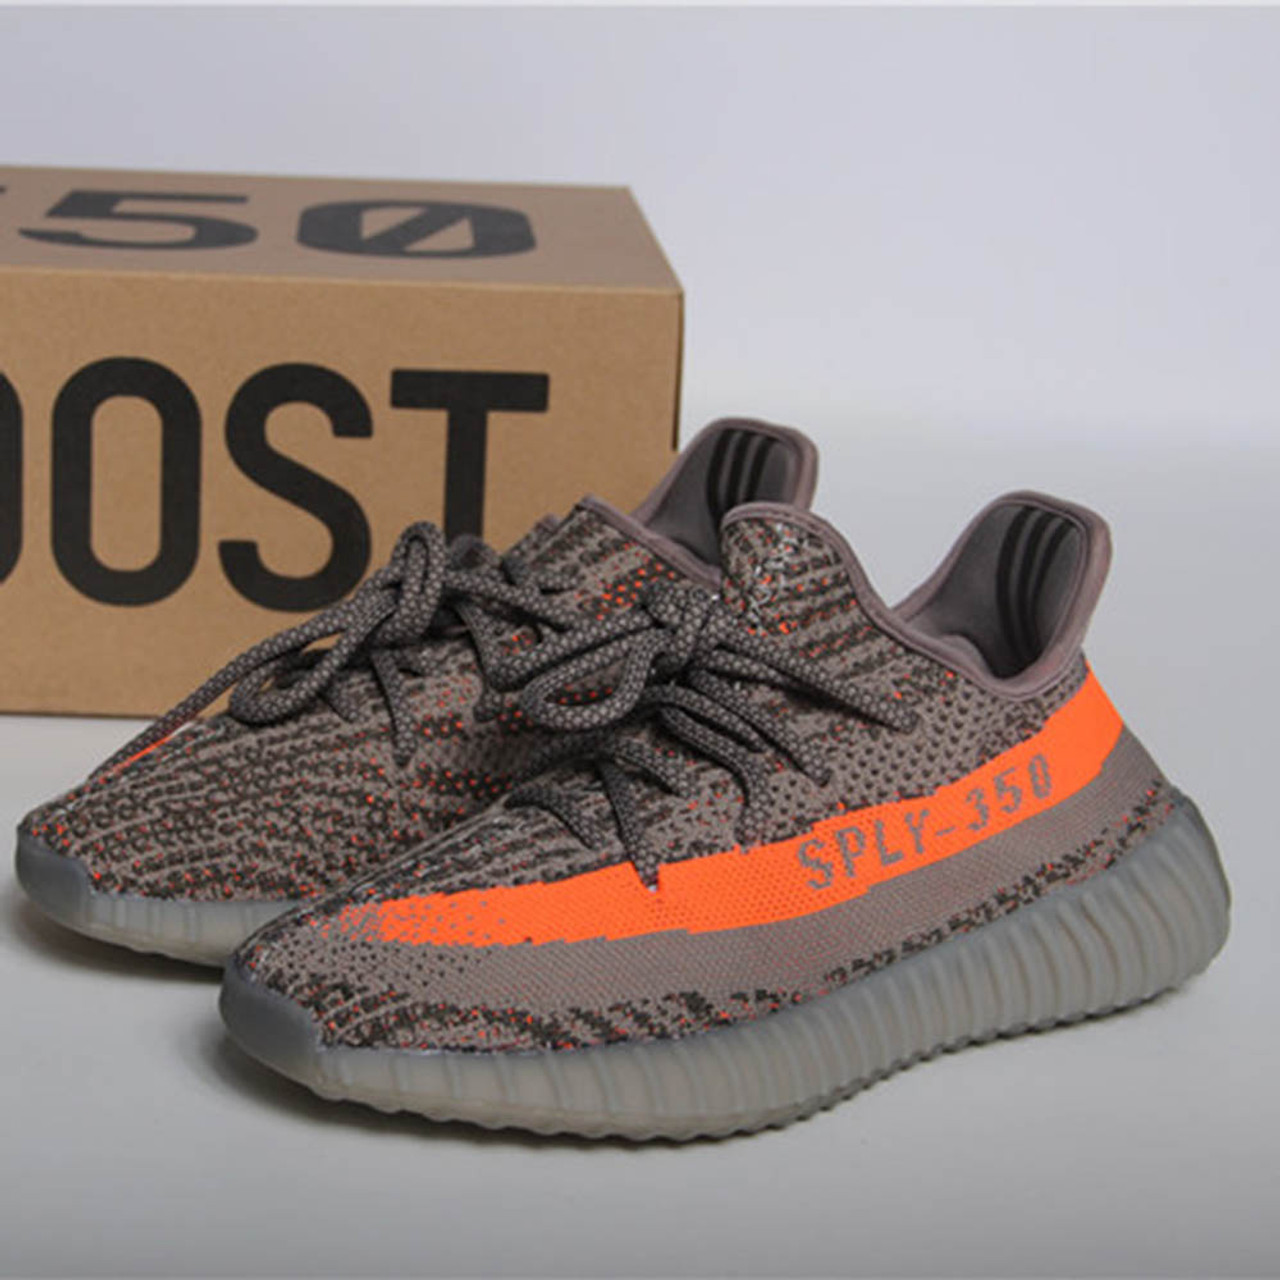 Fabel pengeoverførsel udslettelse where to buy the best stockX UA High quality rep Adidas Yeezy boost 350 V2  Beluga orange stripe colorway sneaker Hypedripz is the best high quality  trusted clone replica fake designer hypebeast